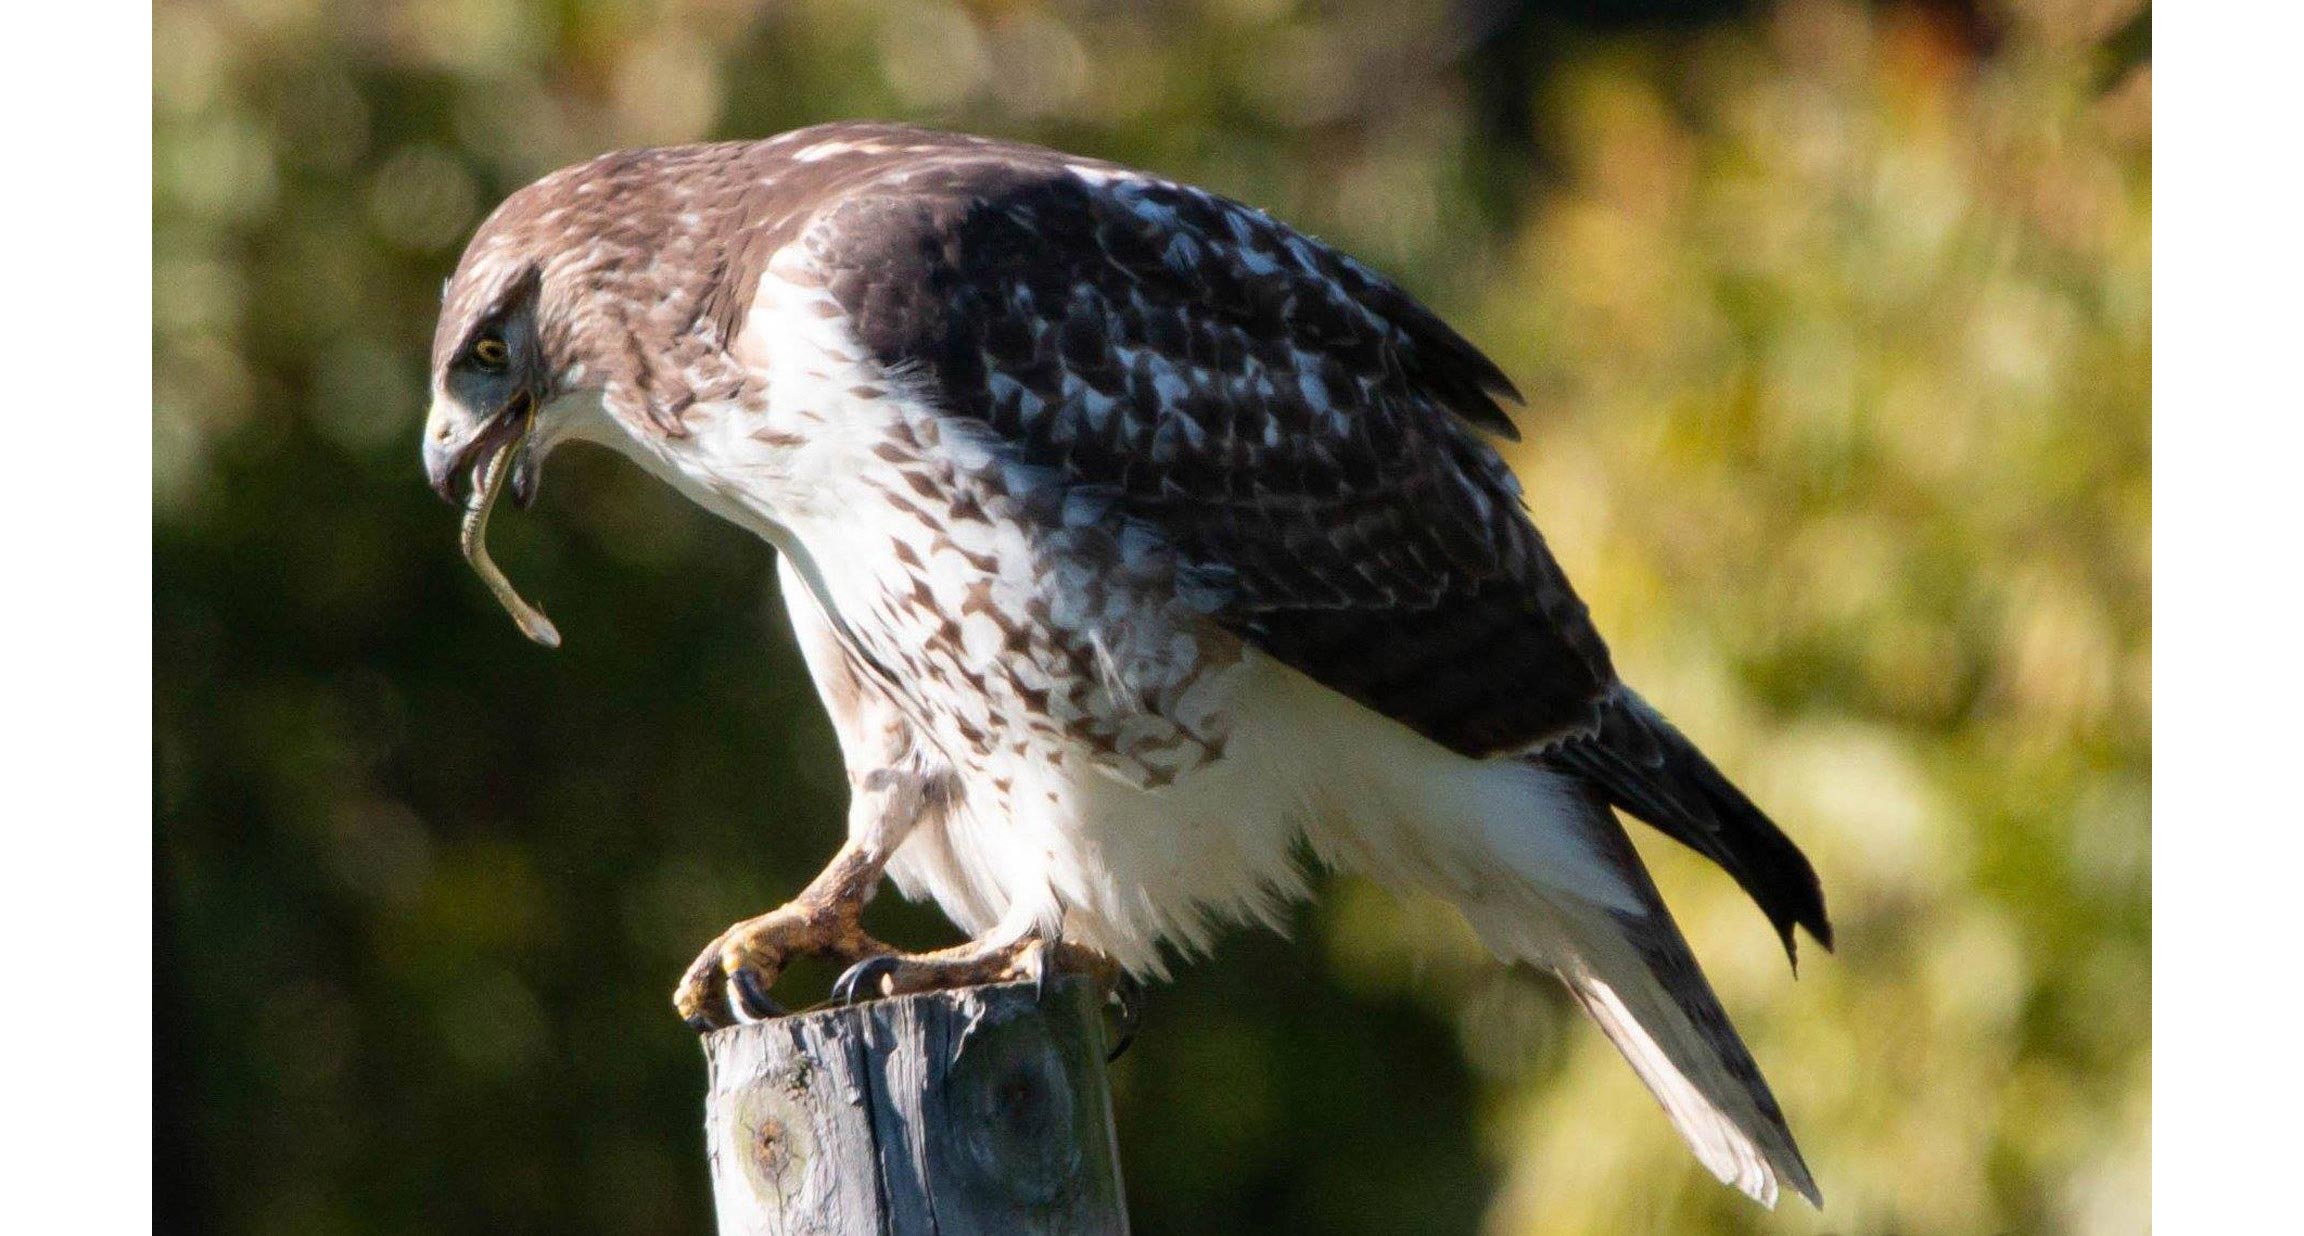 A red-tailed hawk with a snake in its mouth.